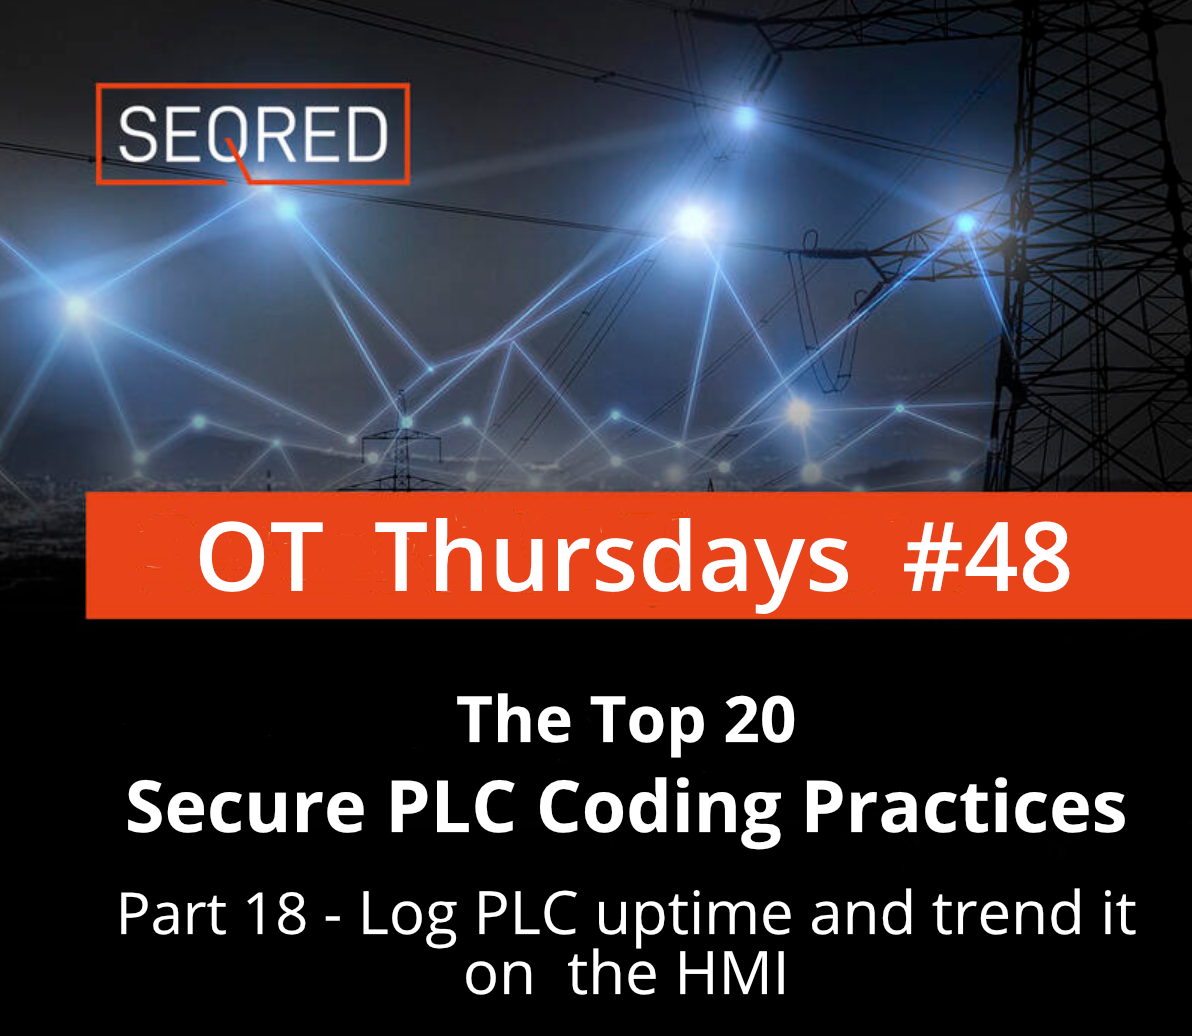 The Top 20 Secure PLC Coding Practices. Part 18 - Log PLC uptime and trend it on the HMI